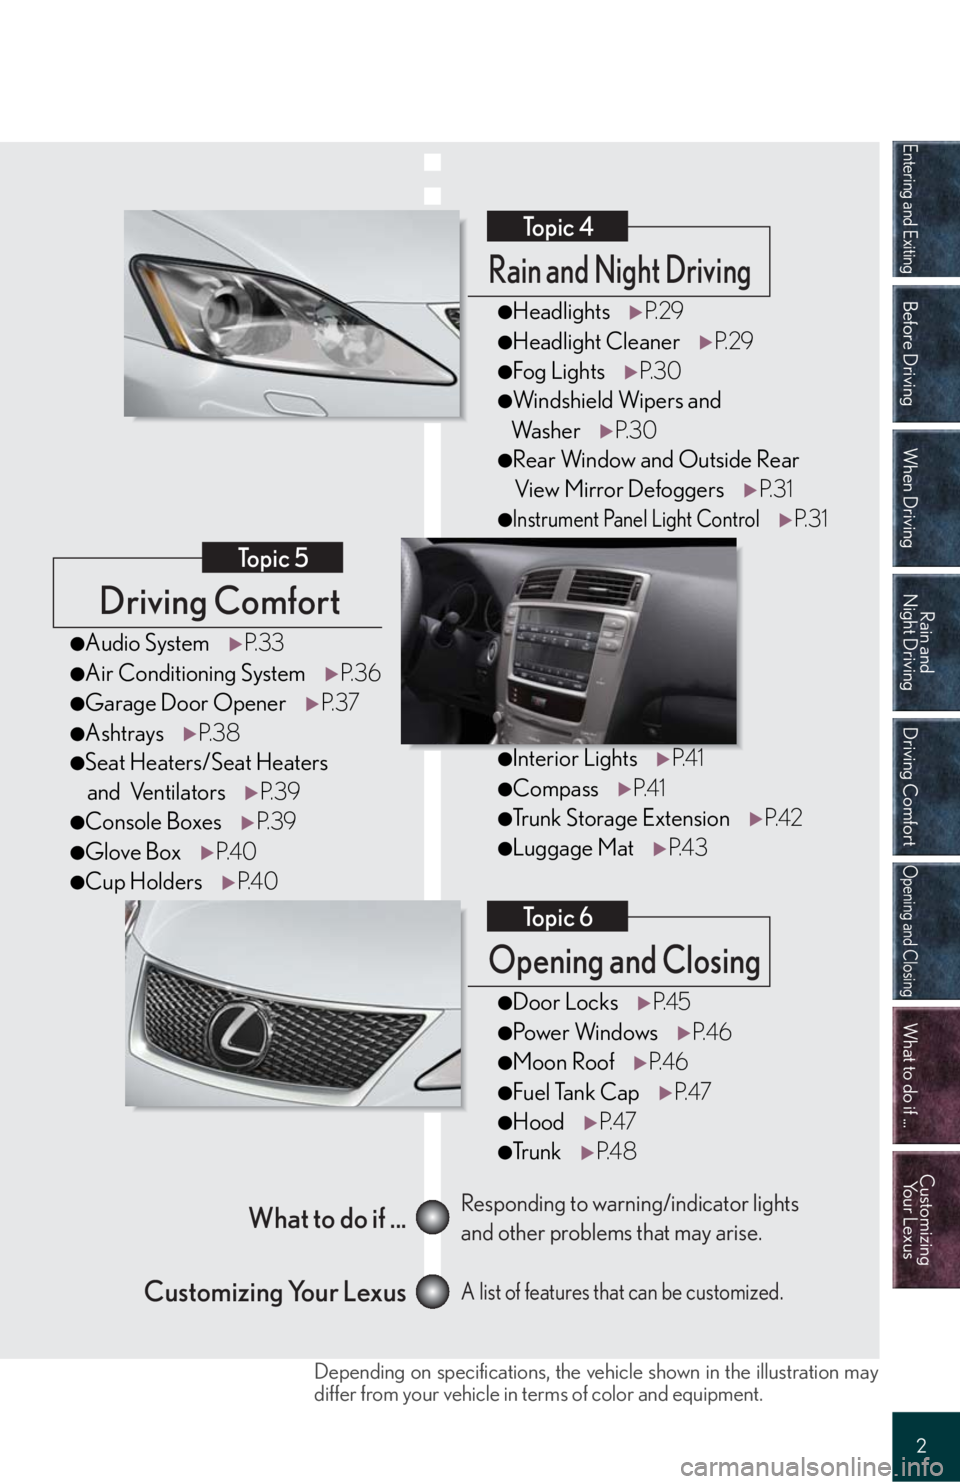 Lexus IS F 2008  Do-It-Yourself Maintenance / LEXUS 2008 IS F QUICK GUIDE OWNERS MANUAL (OM53613U) Entering and Exiting
Before Driving
When Driving
Rain and 
Night Driving
Driving Comfort
Opening and Closing
What to do if ...
Customizing
Yo u r  L e x u s
2
Driving Comfort
Topic 5
Opening and Closi